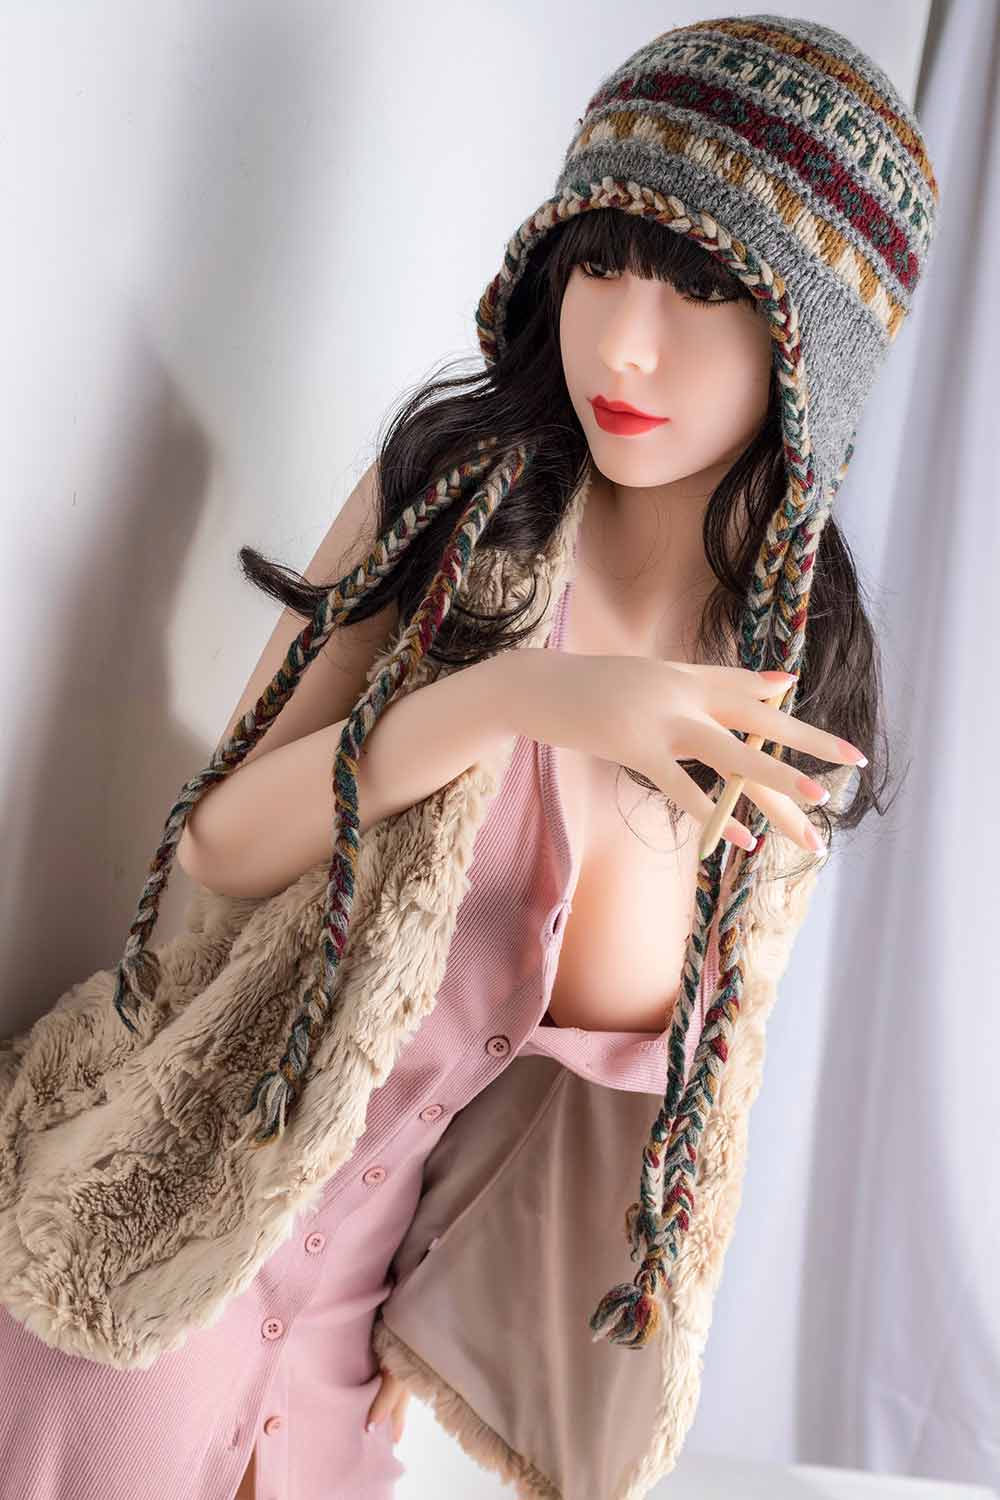 Sex doll with pen between fingers